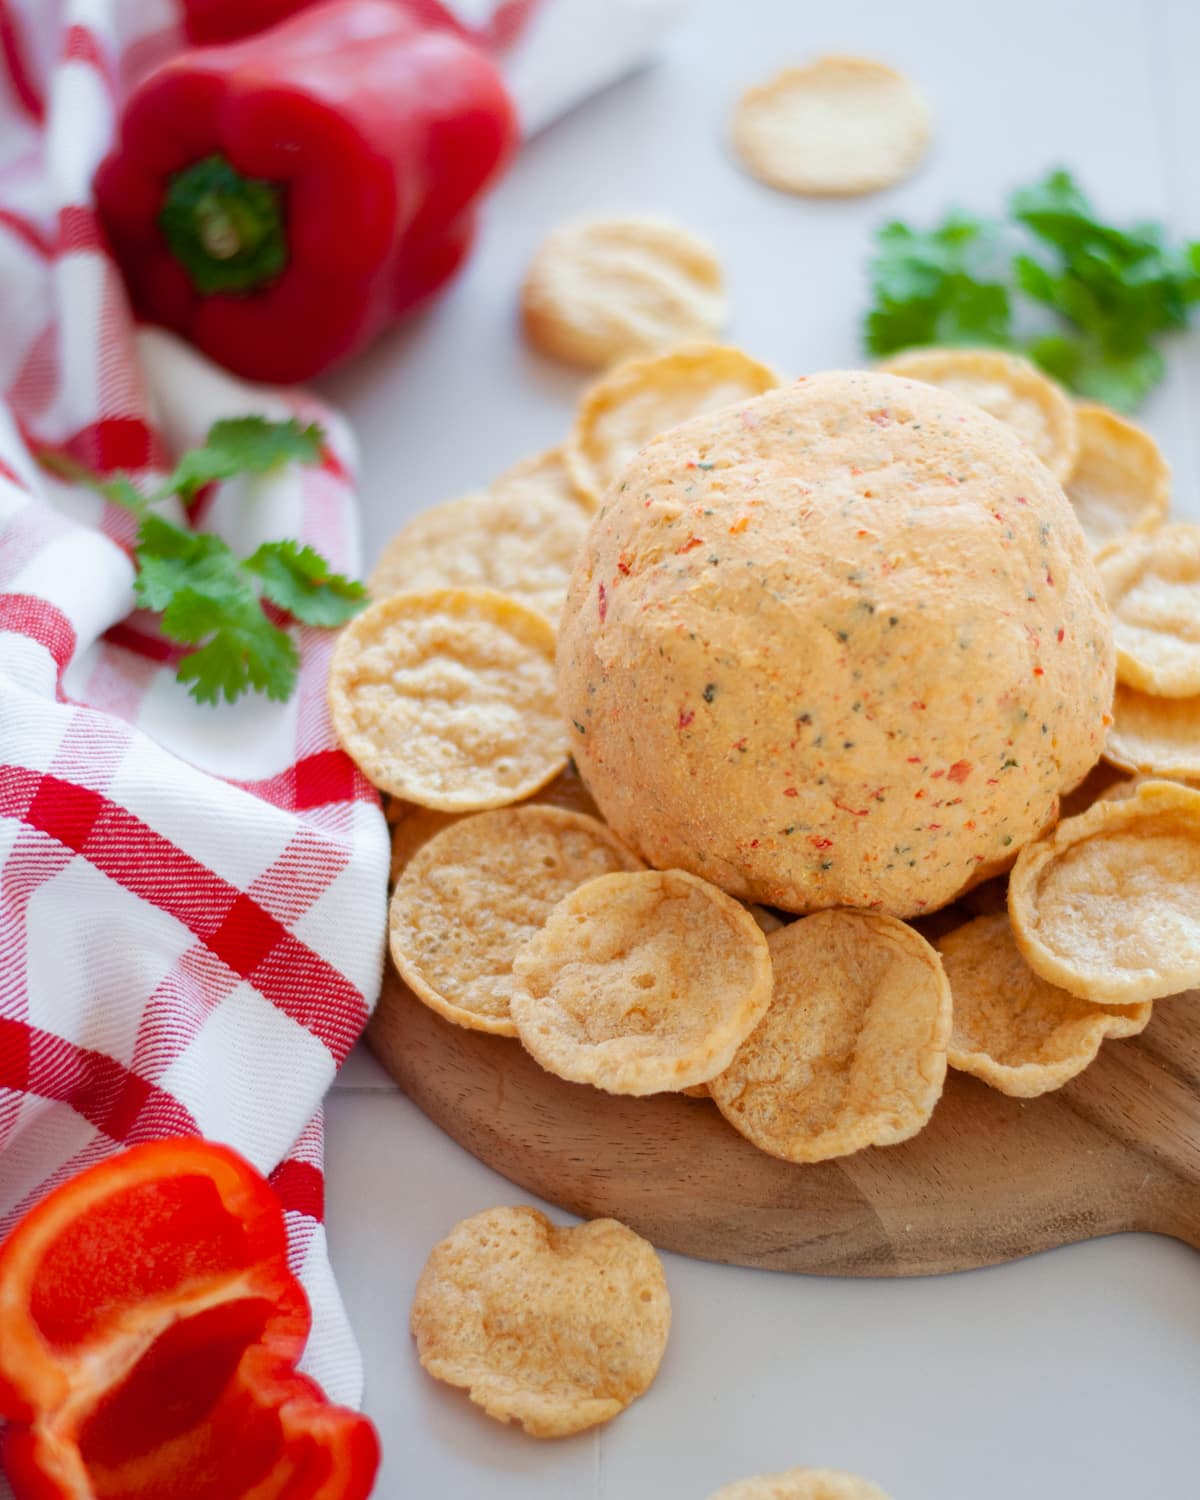 a tex mex cheese ball served on a round wooden platter with chips. there is cilantro, bell peppers, a red and white checked linen, and additional chips, around the scene.